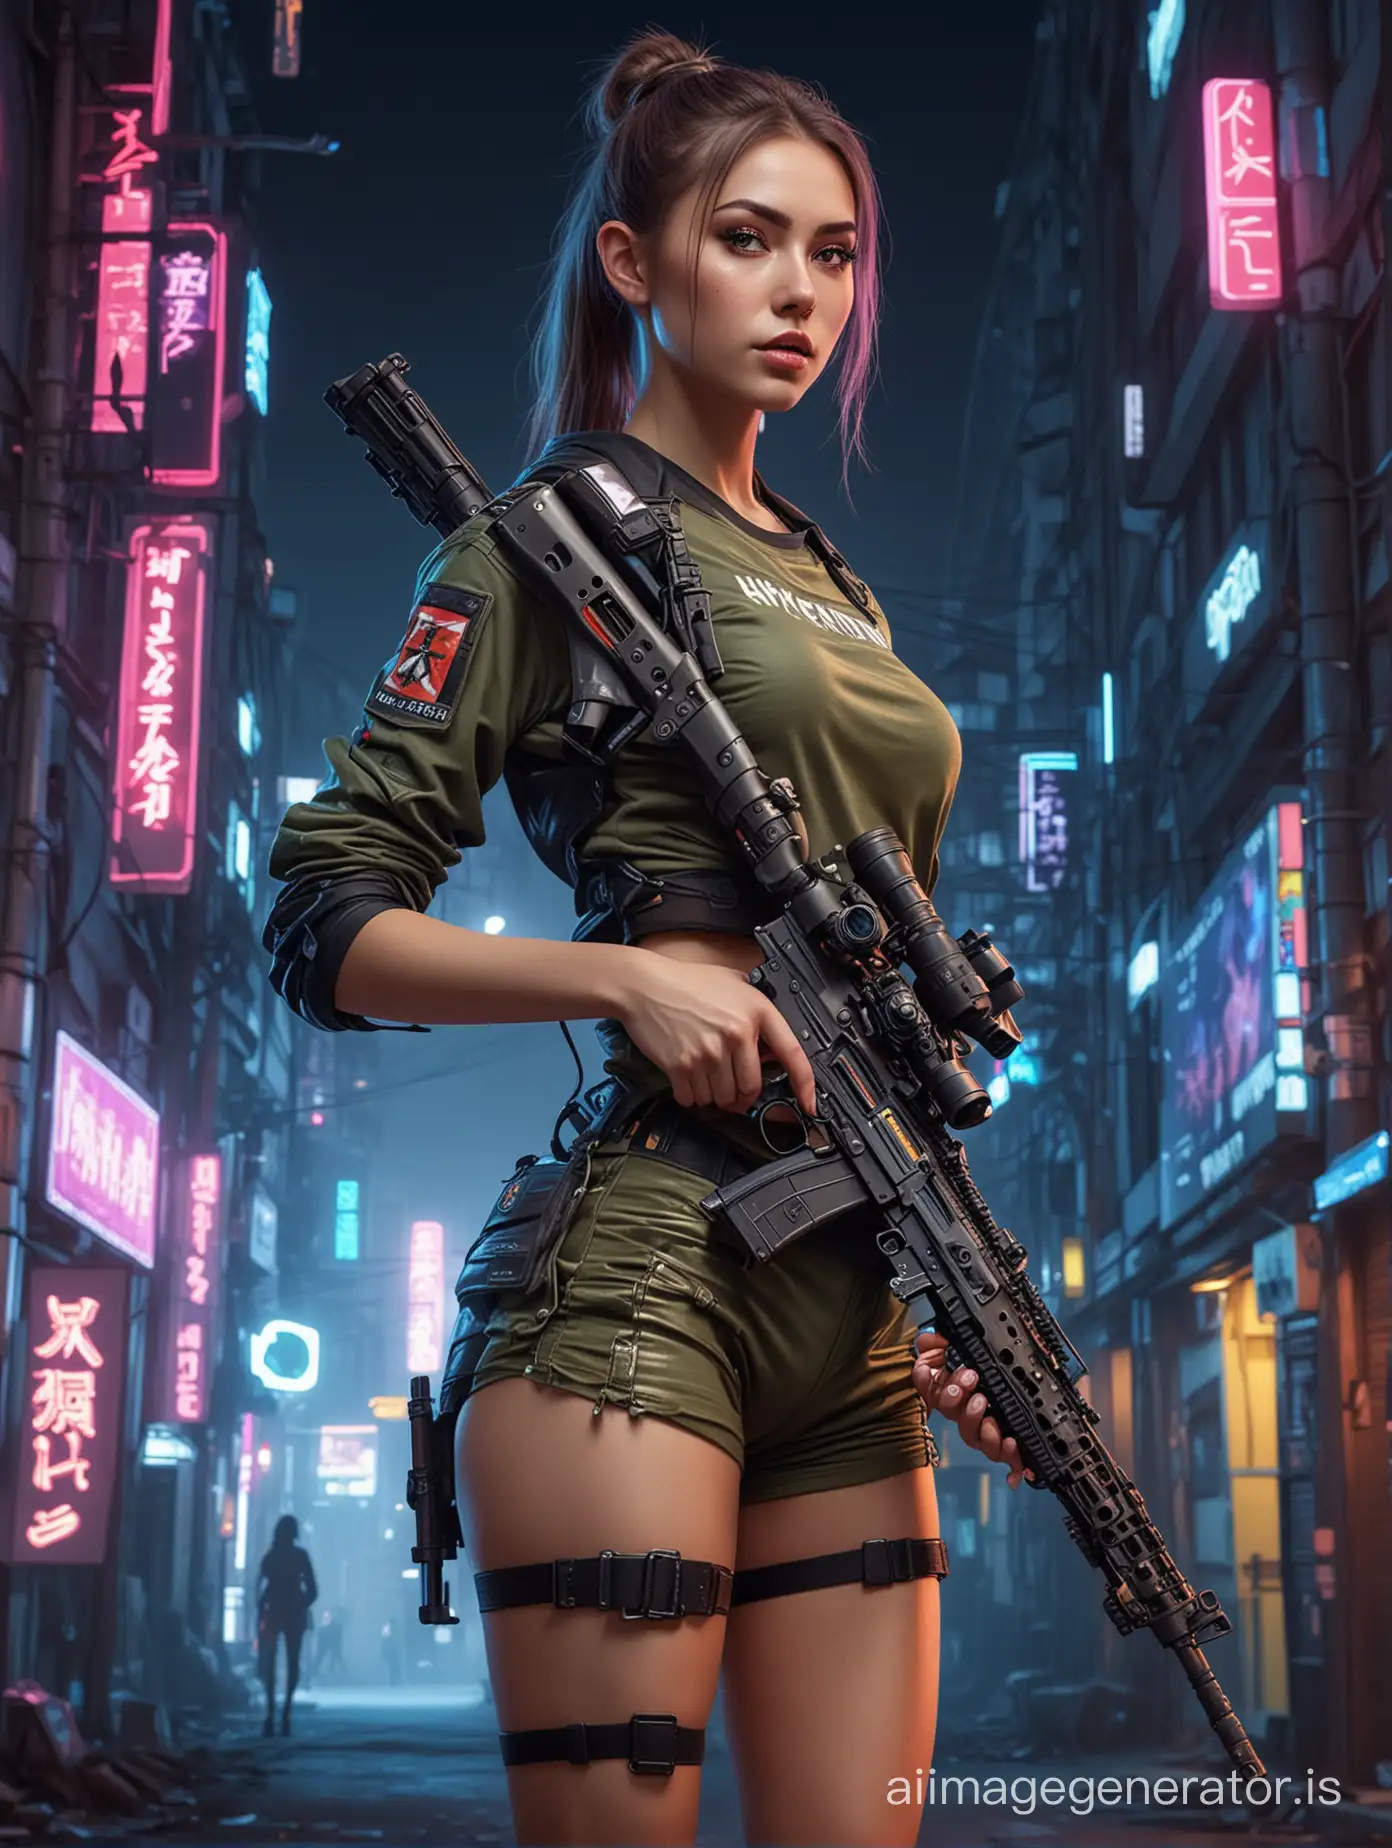 Sci-fi slim Ukrainian girl with small breasts in military t-shirt and shorts with slim lags holding sniper rifle with Japanese cyberpunk night city neon lights on the background